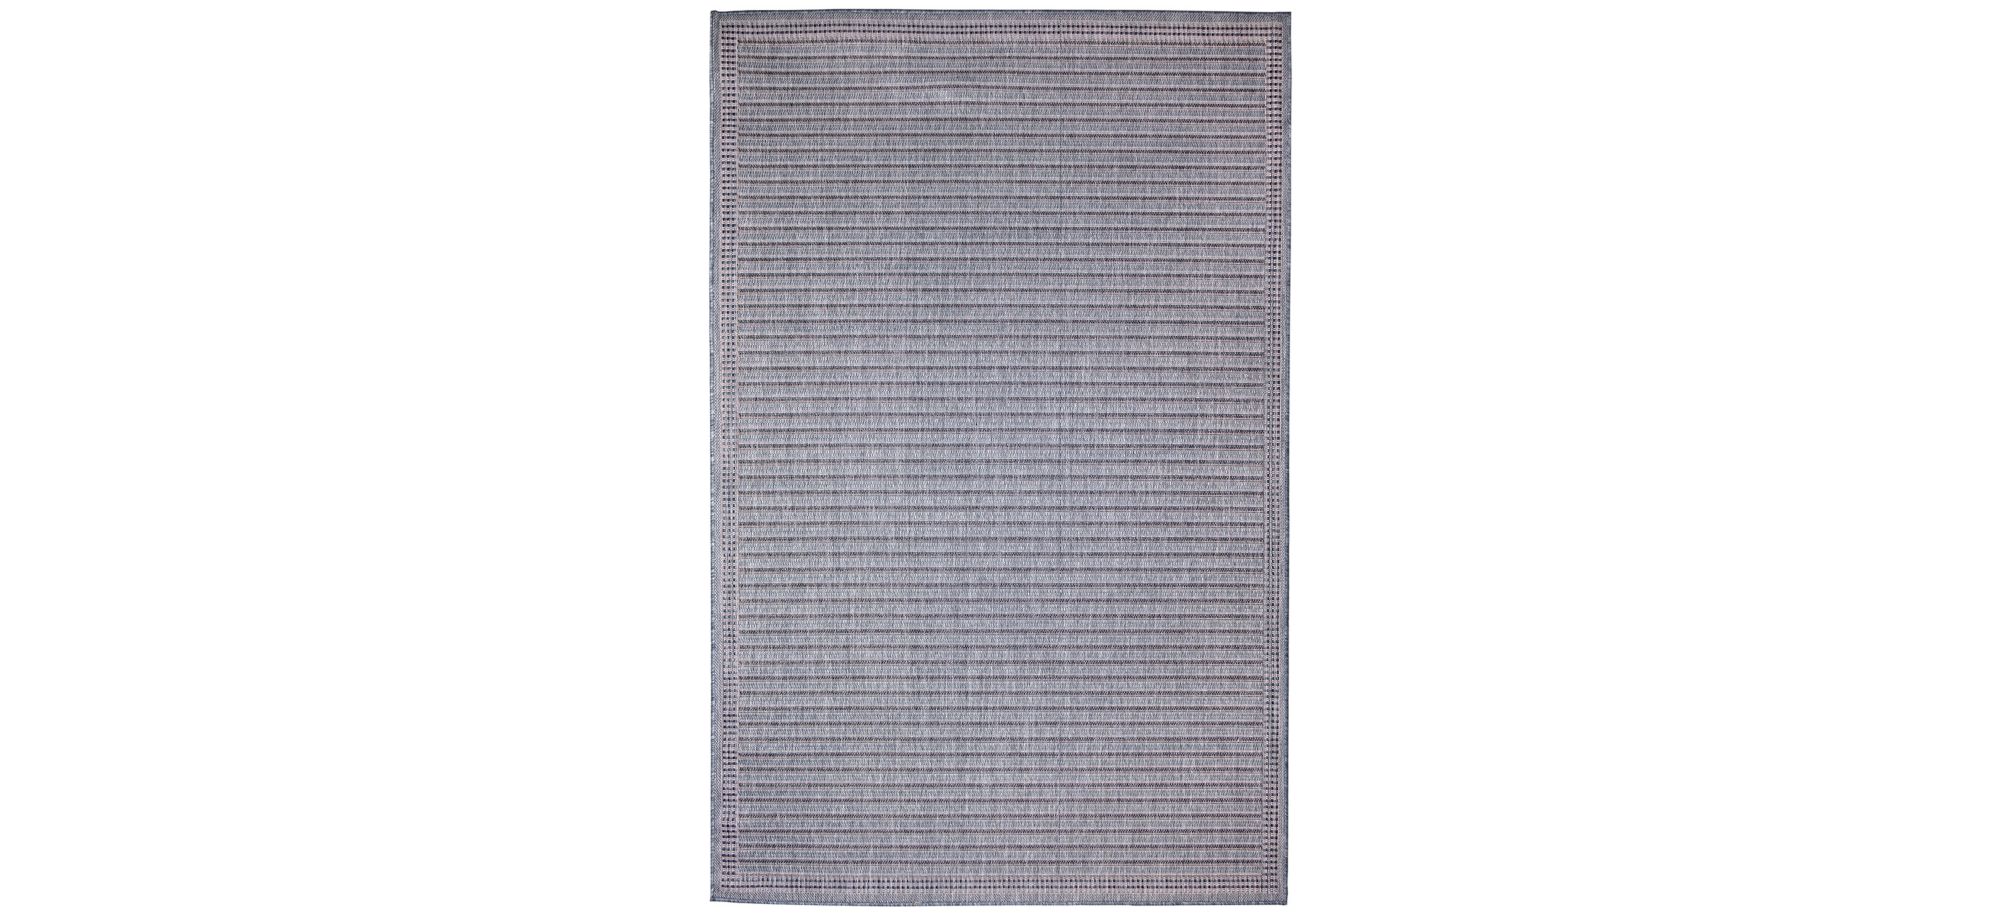 Liora Manne Malibu Simple Border Indoor/Outdoor Area Rug in Navy by Trans-Ocean Import Co Inc